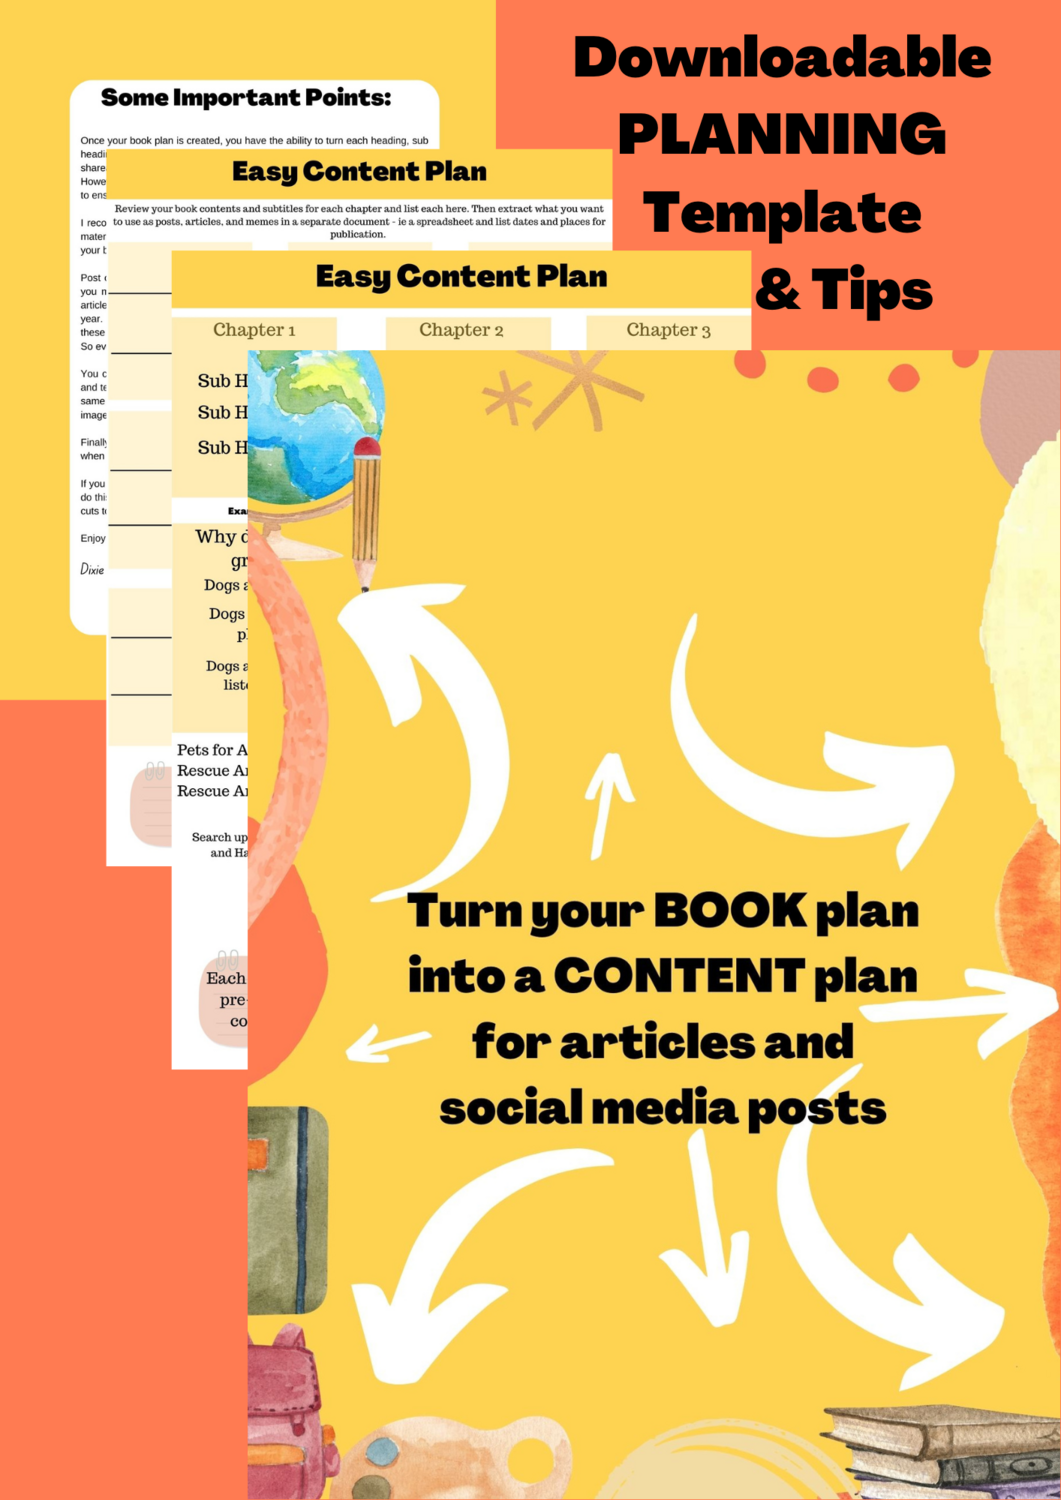 Turn your BOOK Plan into an Easy CONTENT Plan for articles and posts.